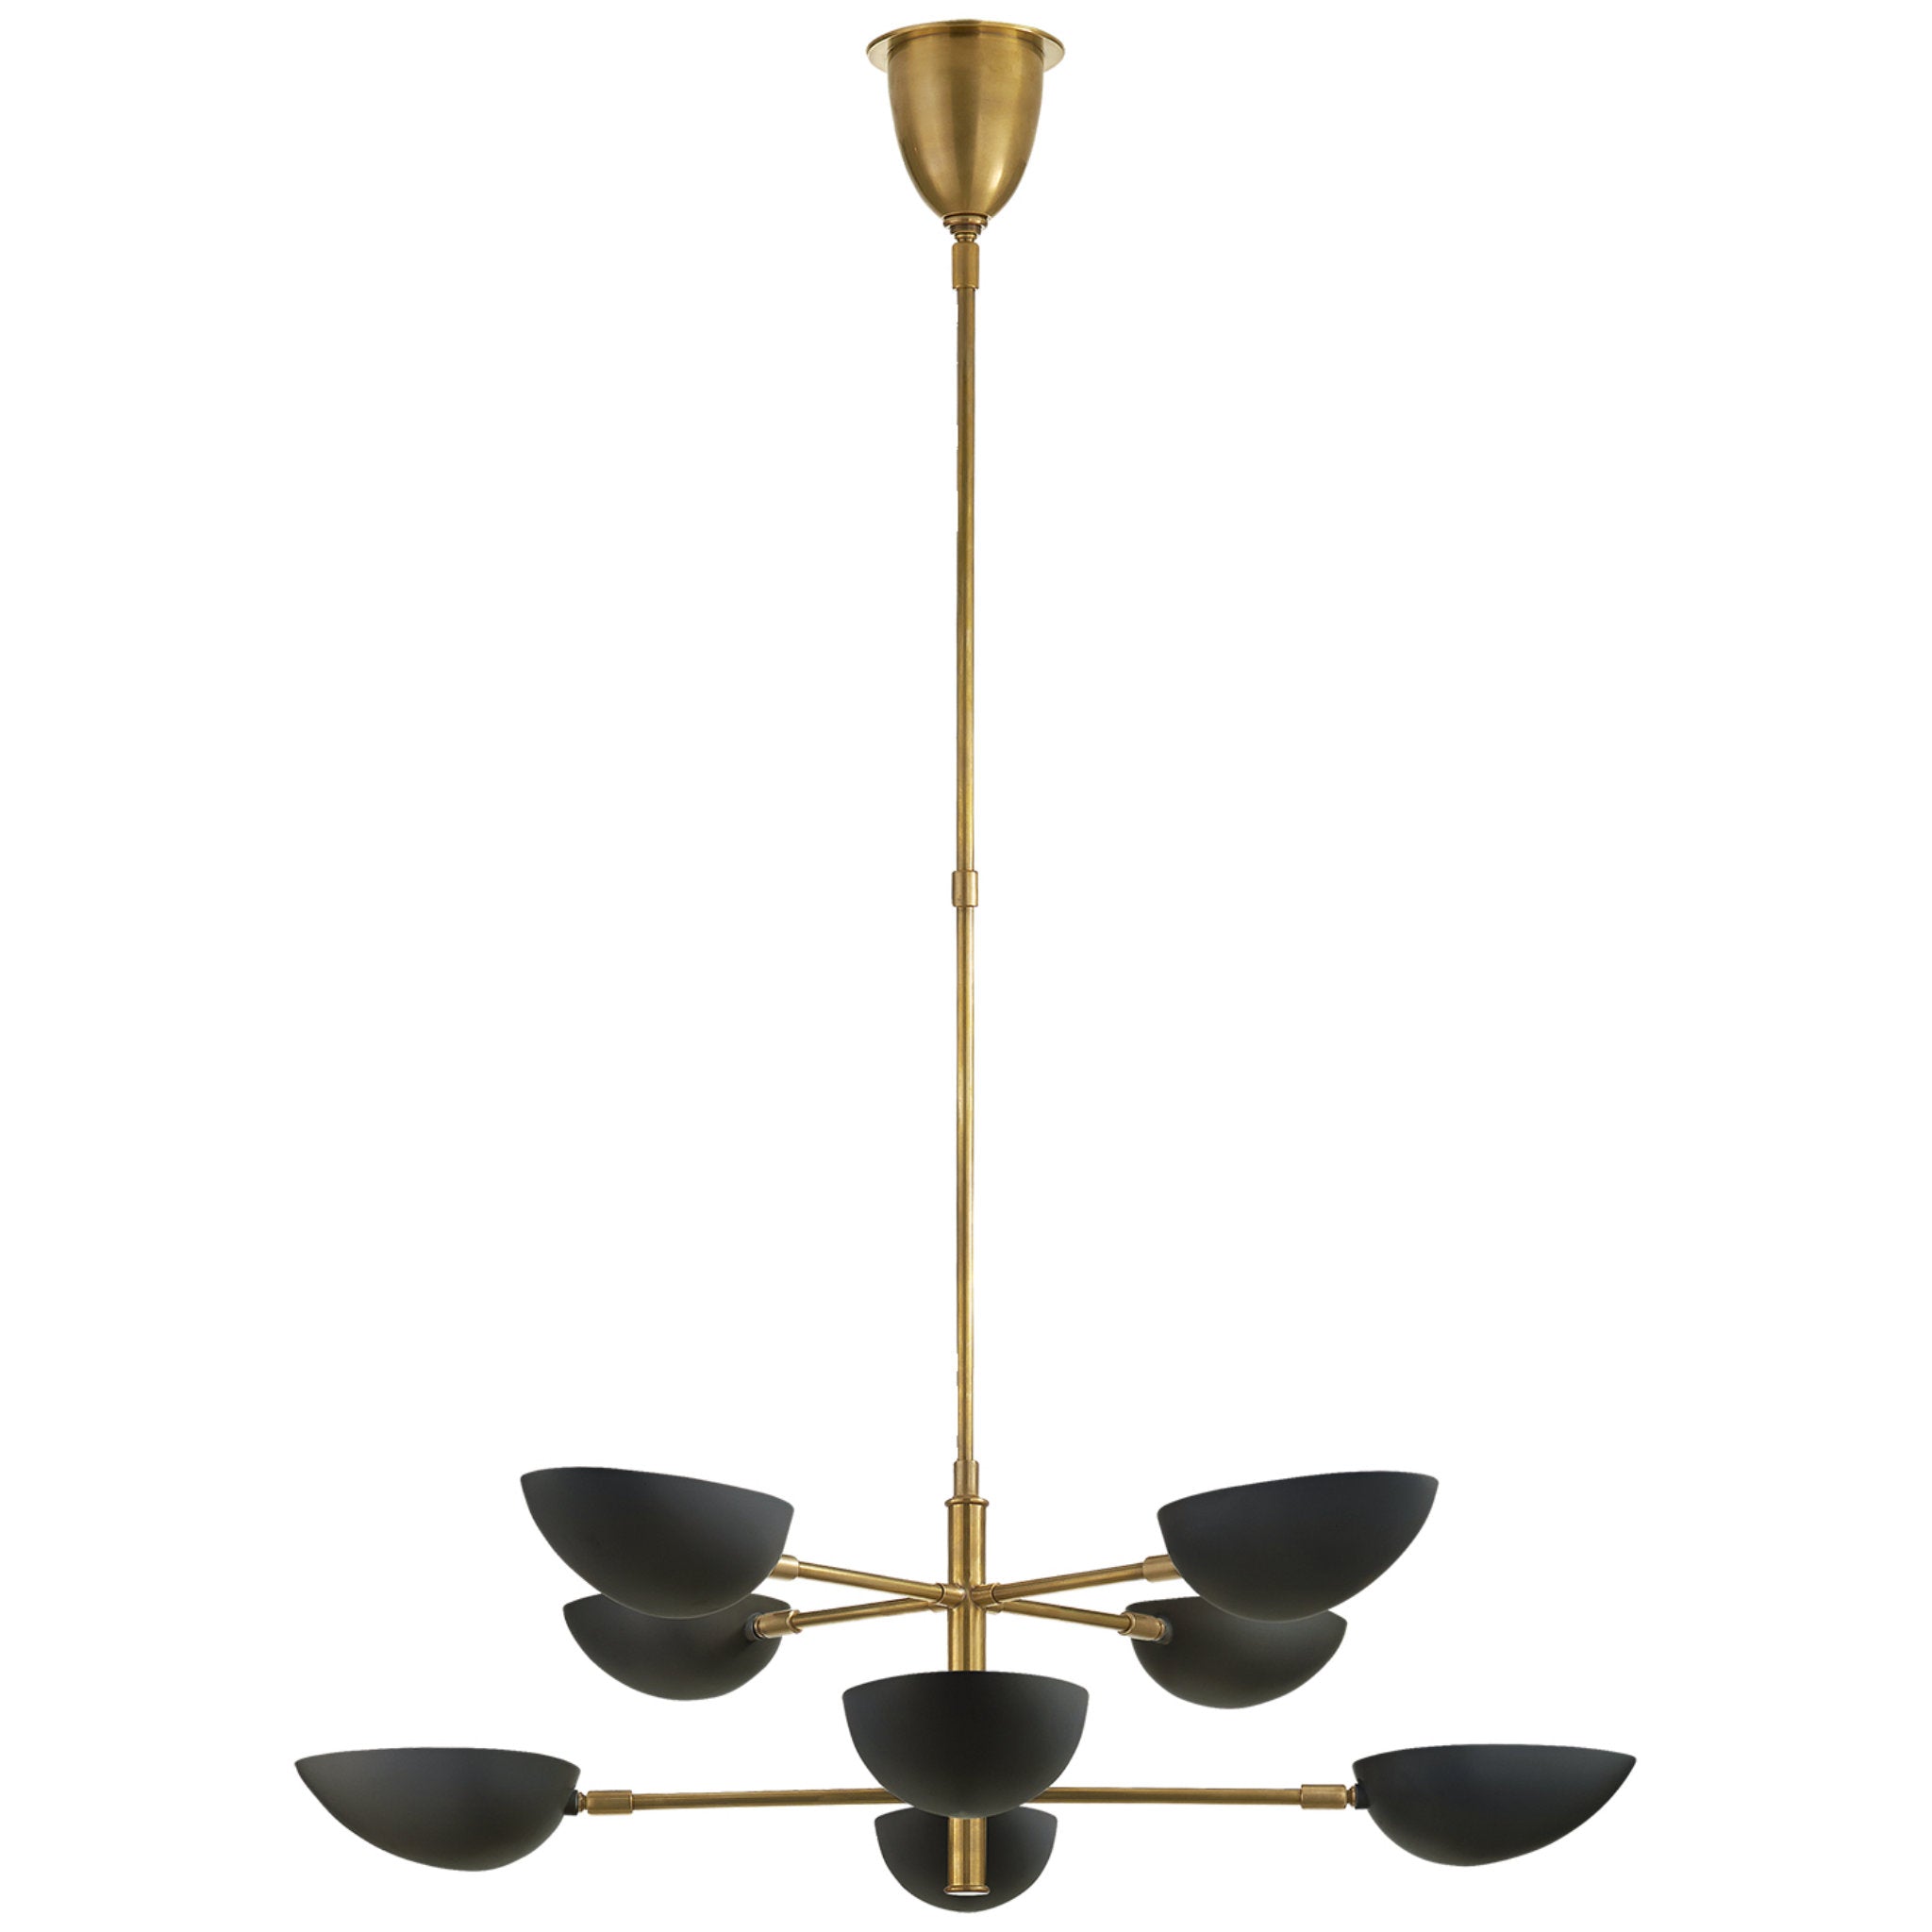 AERIN Graphic Large Two-Tier Chandelier in Hand-Rubbed Antique Brass with Black Shades